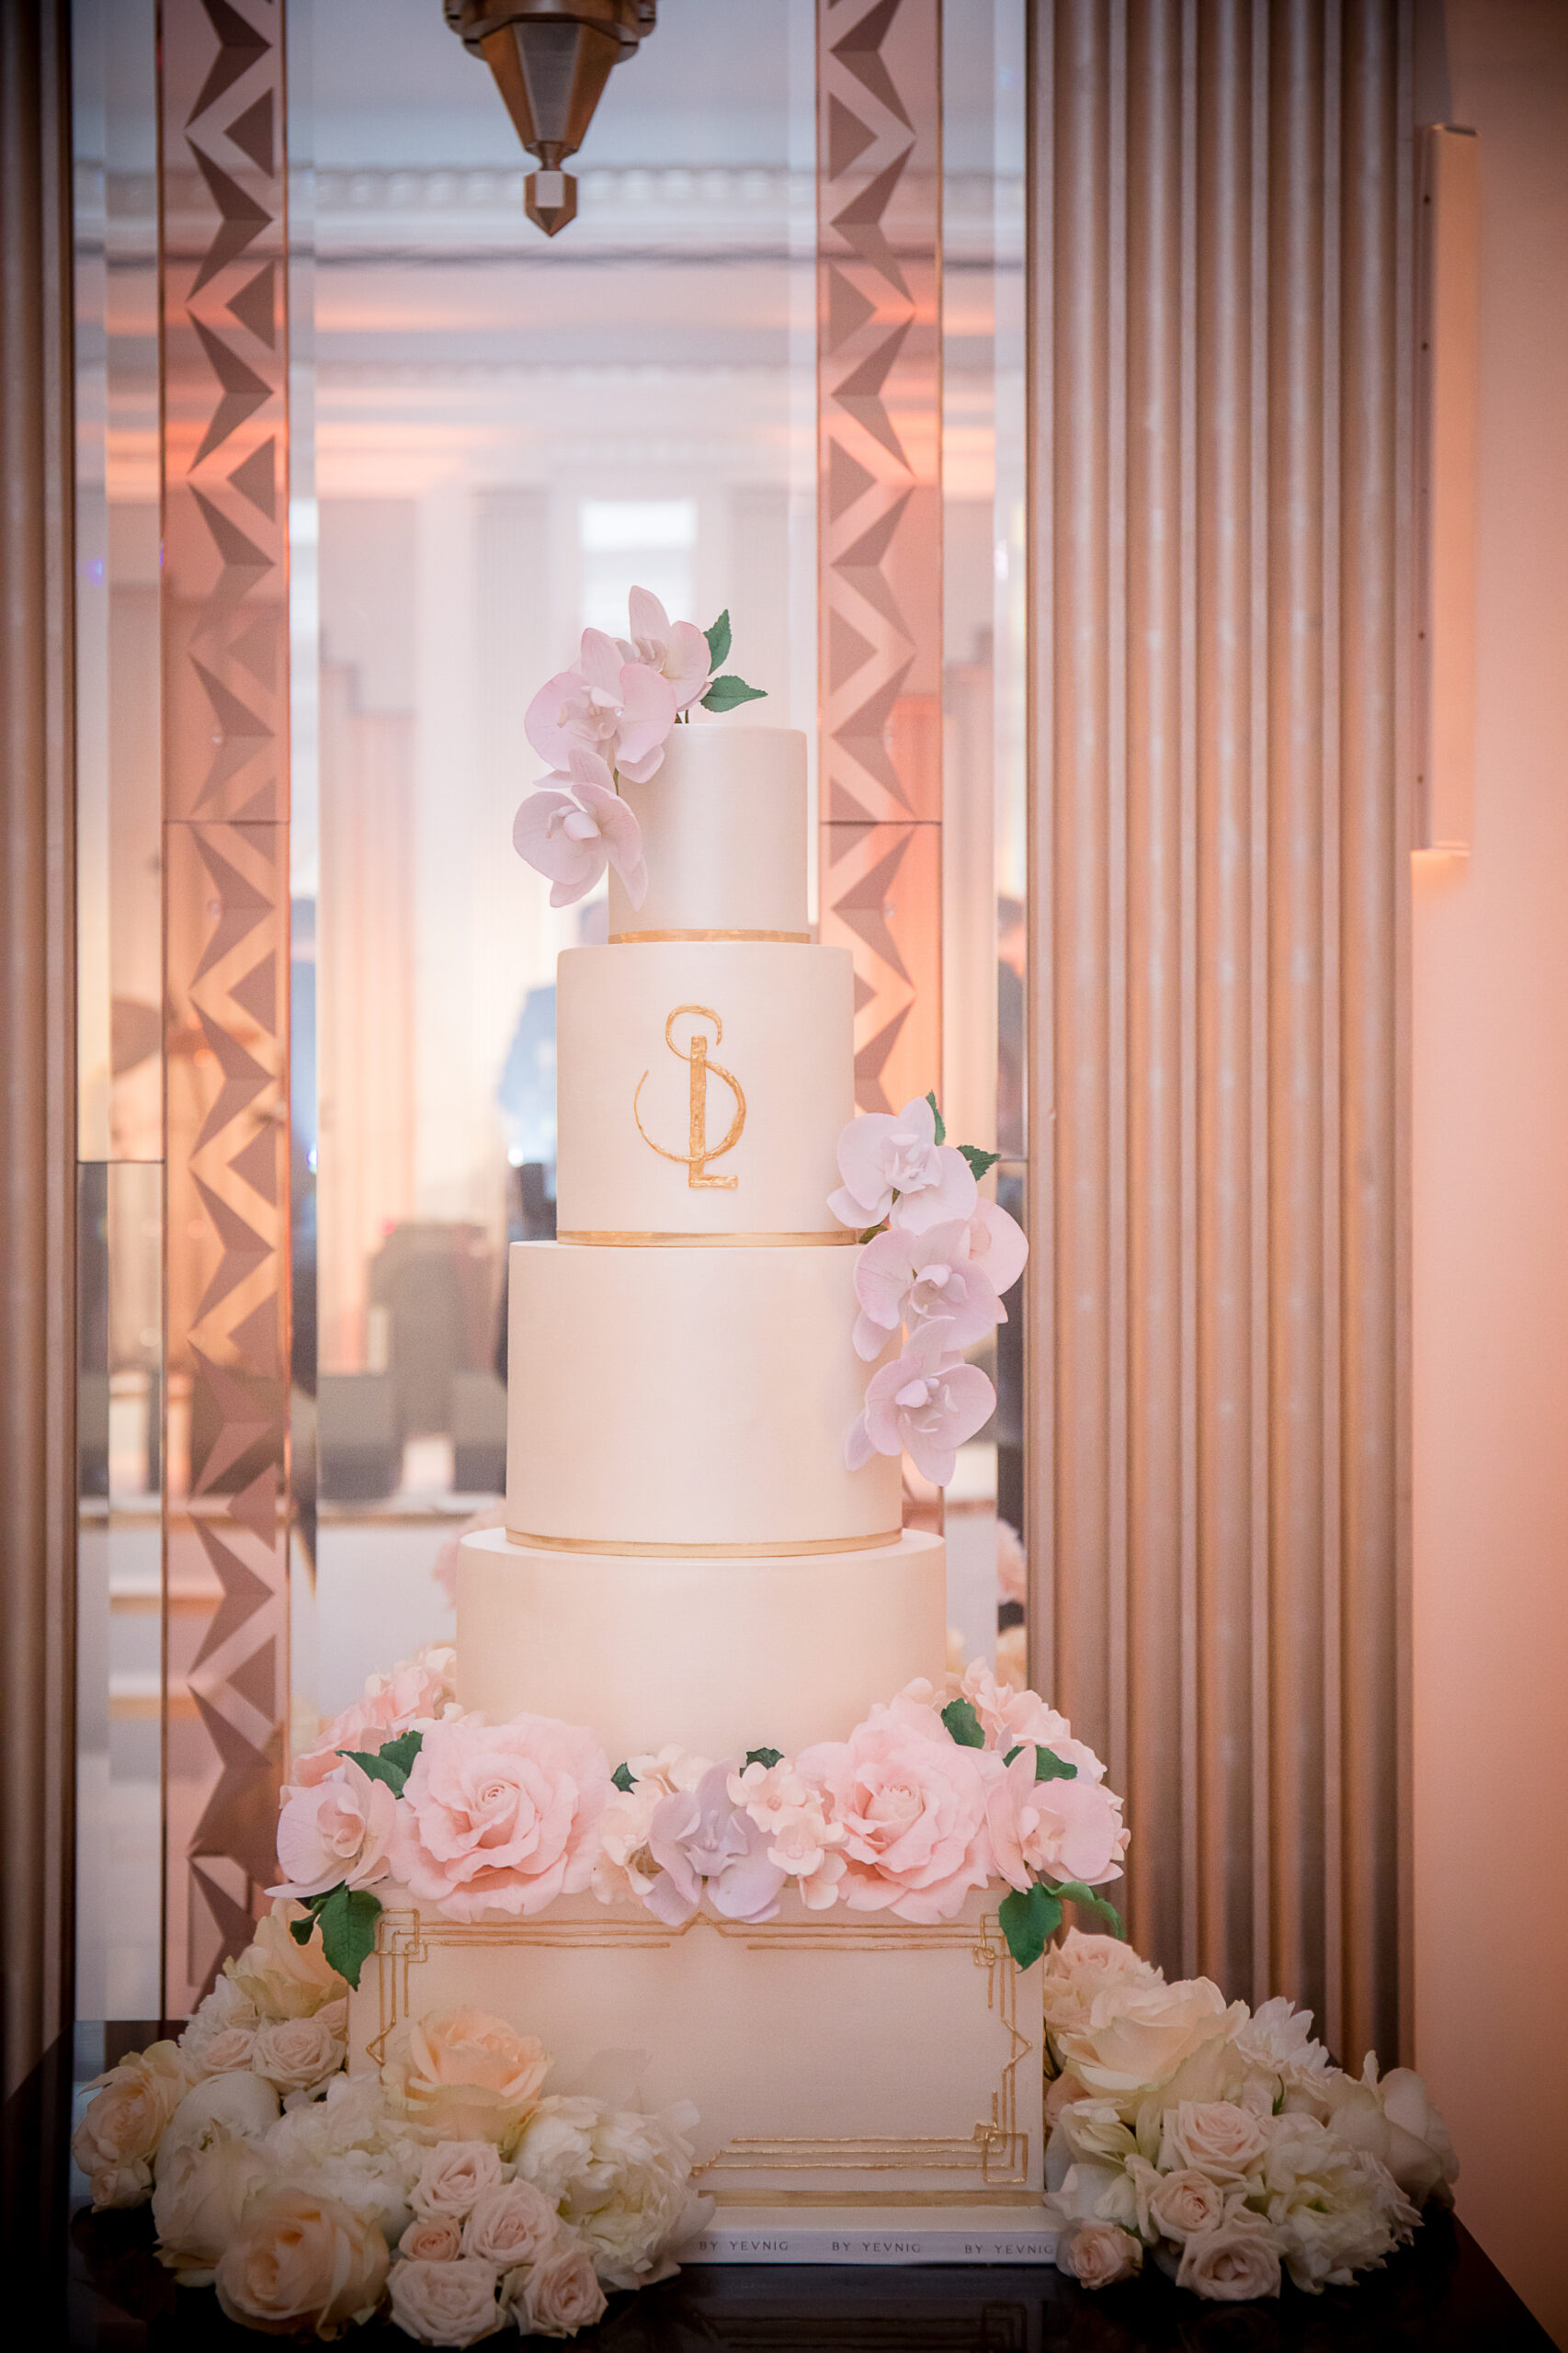 Art Deco Chic luxury wedding cake By Yevnig for Orchid Events at Claridge's Hotel, by Promise Photography